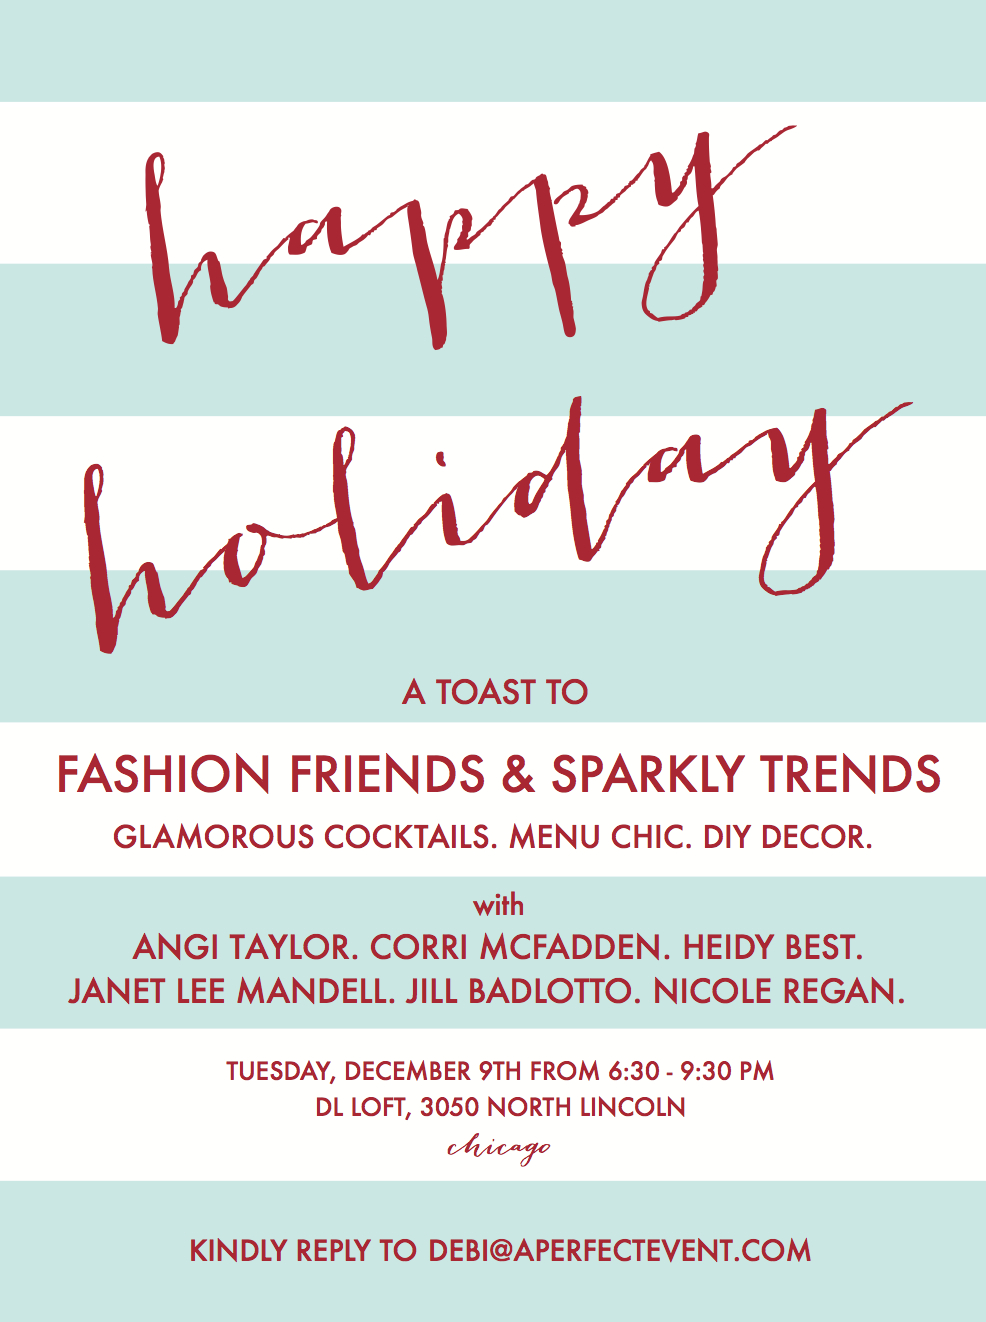 Fashion Friends & Sparkly Trends